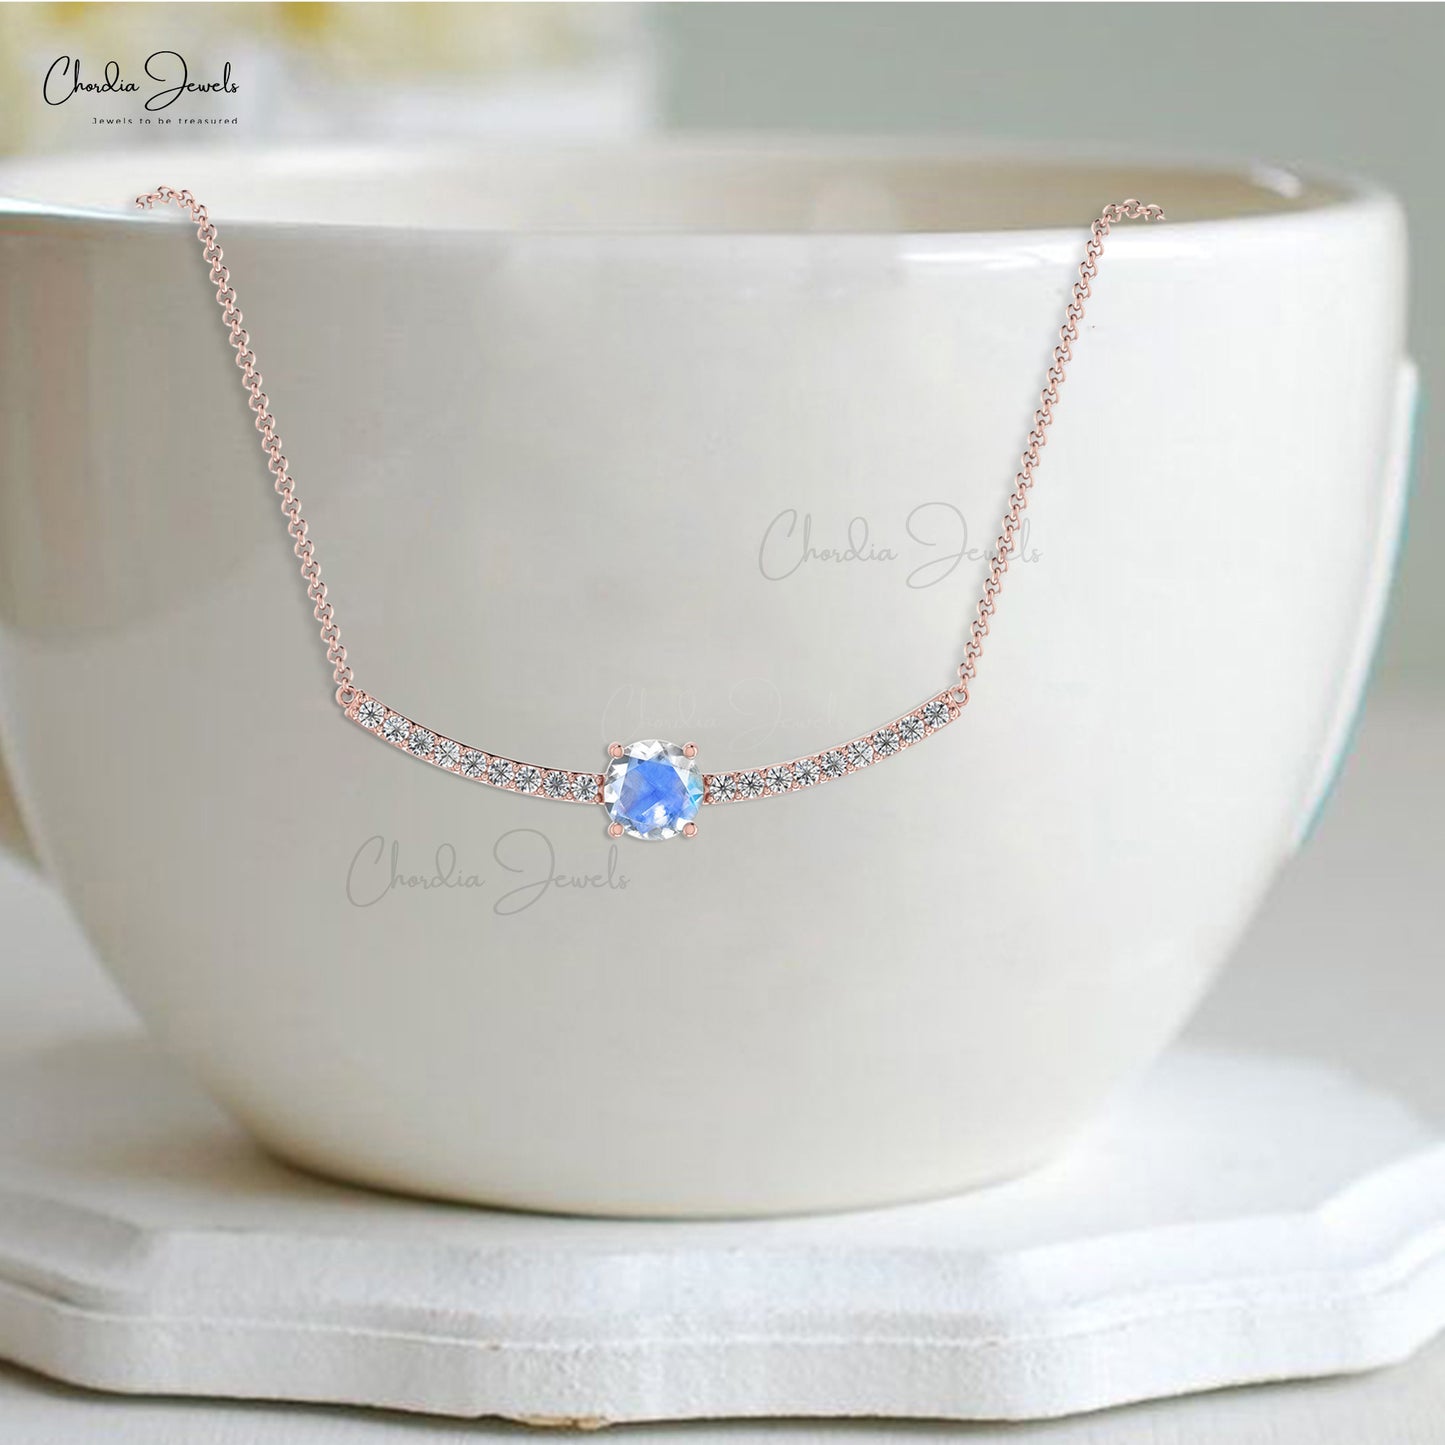 5mm Round Faceted June Birthstone Necklace, 0.6 Carat Natural Rainbow Moonstone Necklace, 14k Solid Gold Diamond Necklace Gift for Her